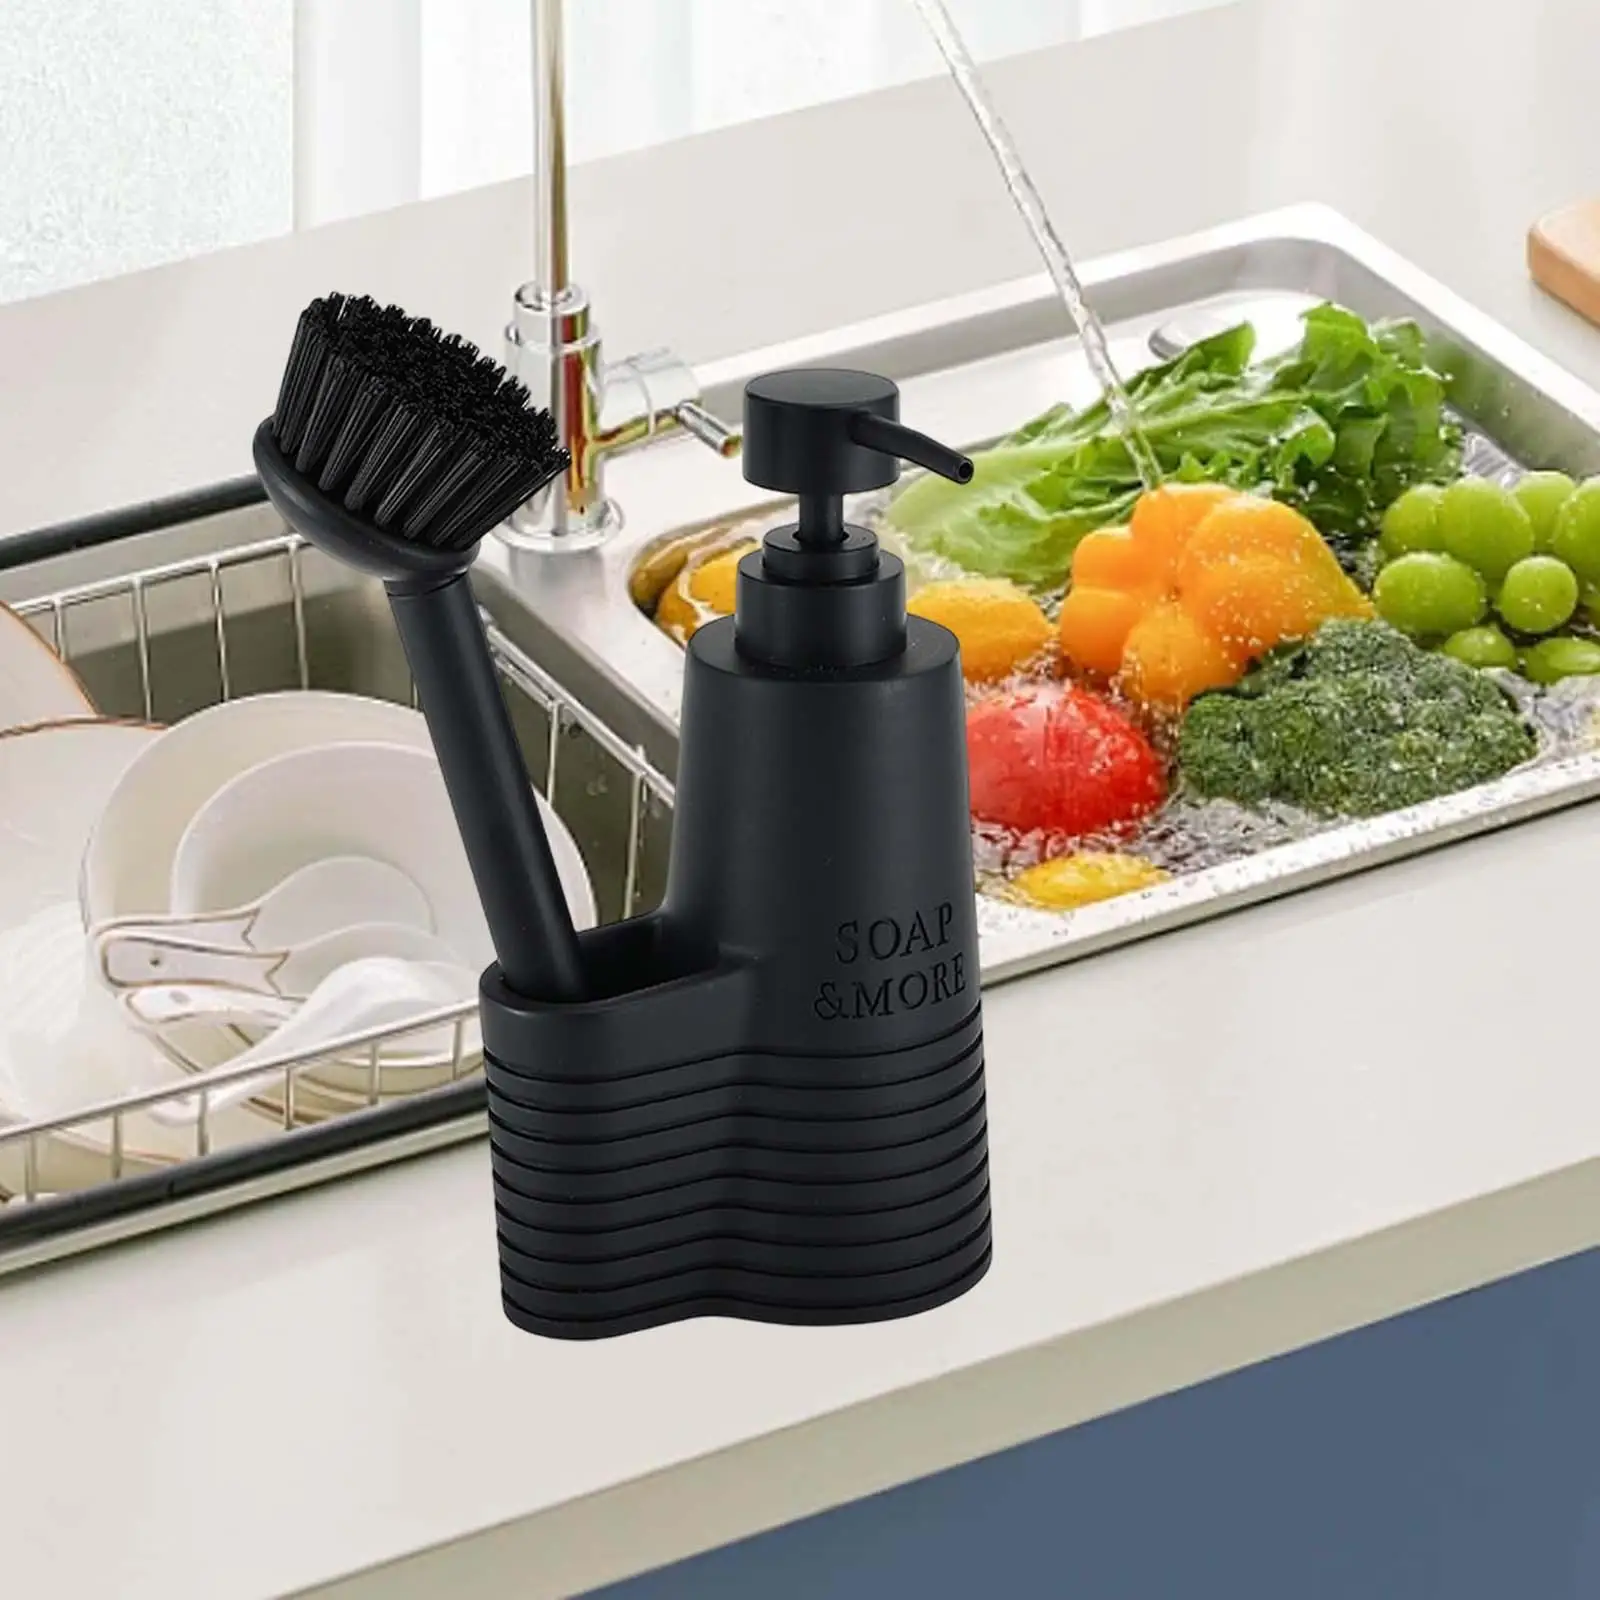 Kitchen Dish Brush with Soap Dispenser Space Saving Durable Easily Squeeze and Refillable for Kitchen Sink Accessory Good Helper